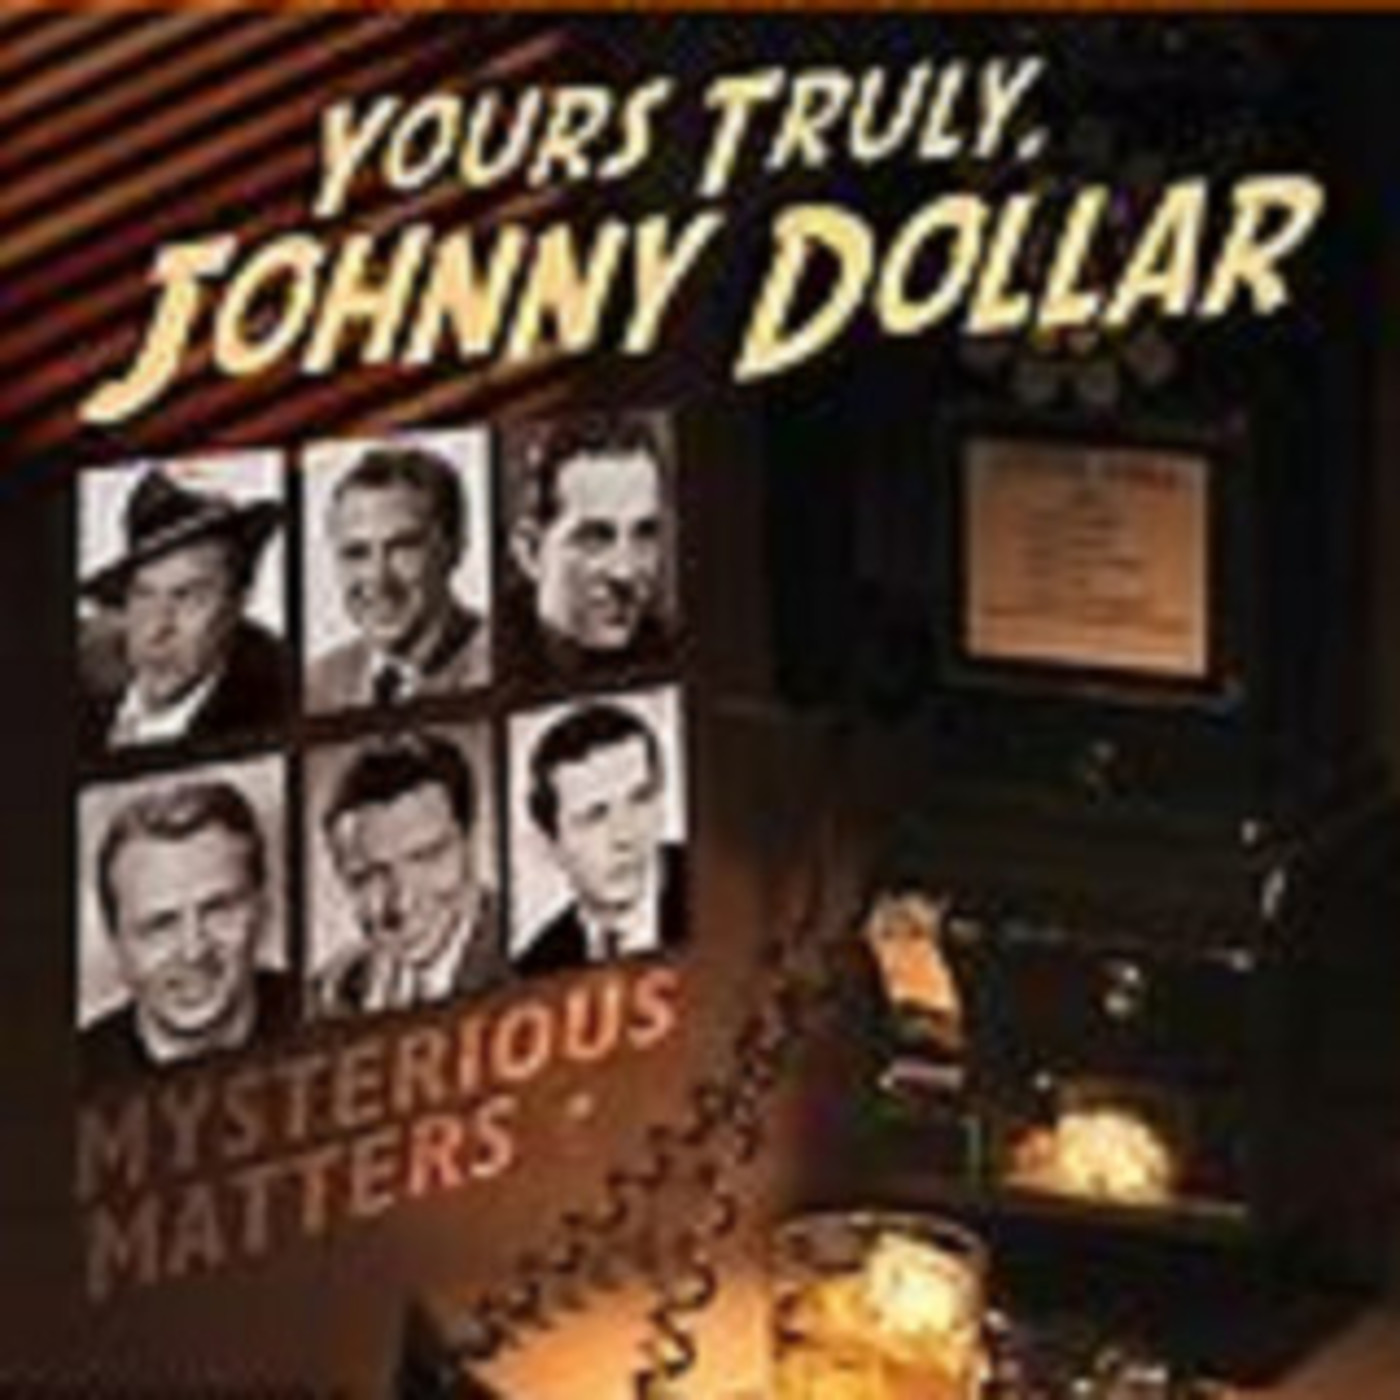 Yours Truly, Johnny Dollar - 081962, episode 805 - The Lorelei Matter (AFRS)